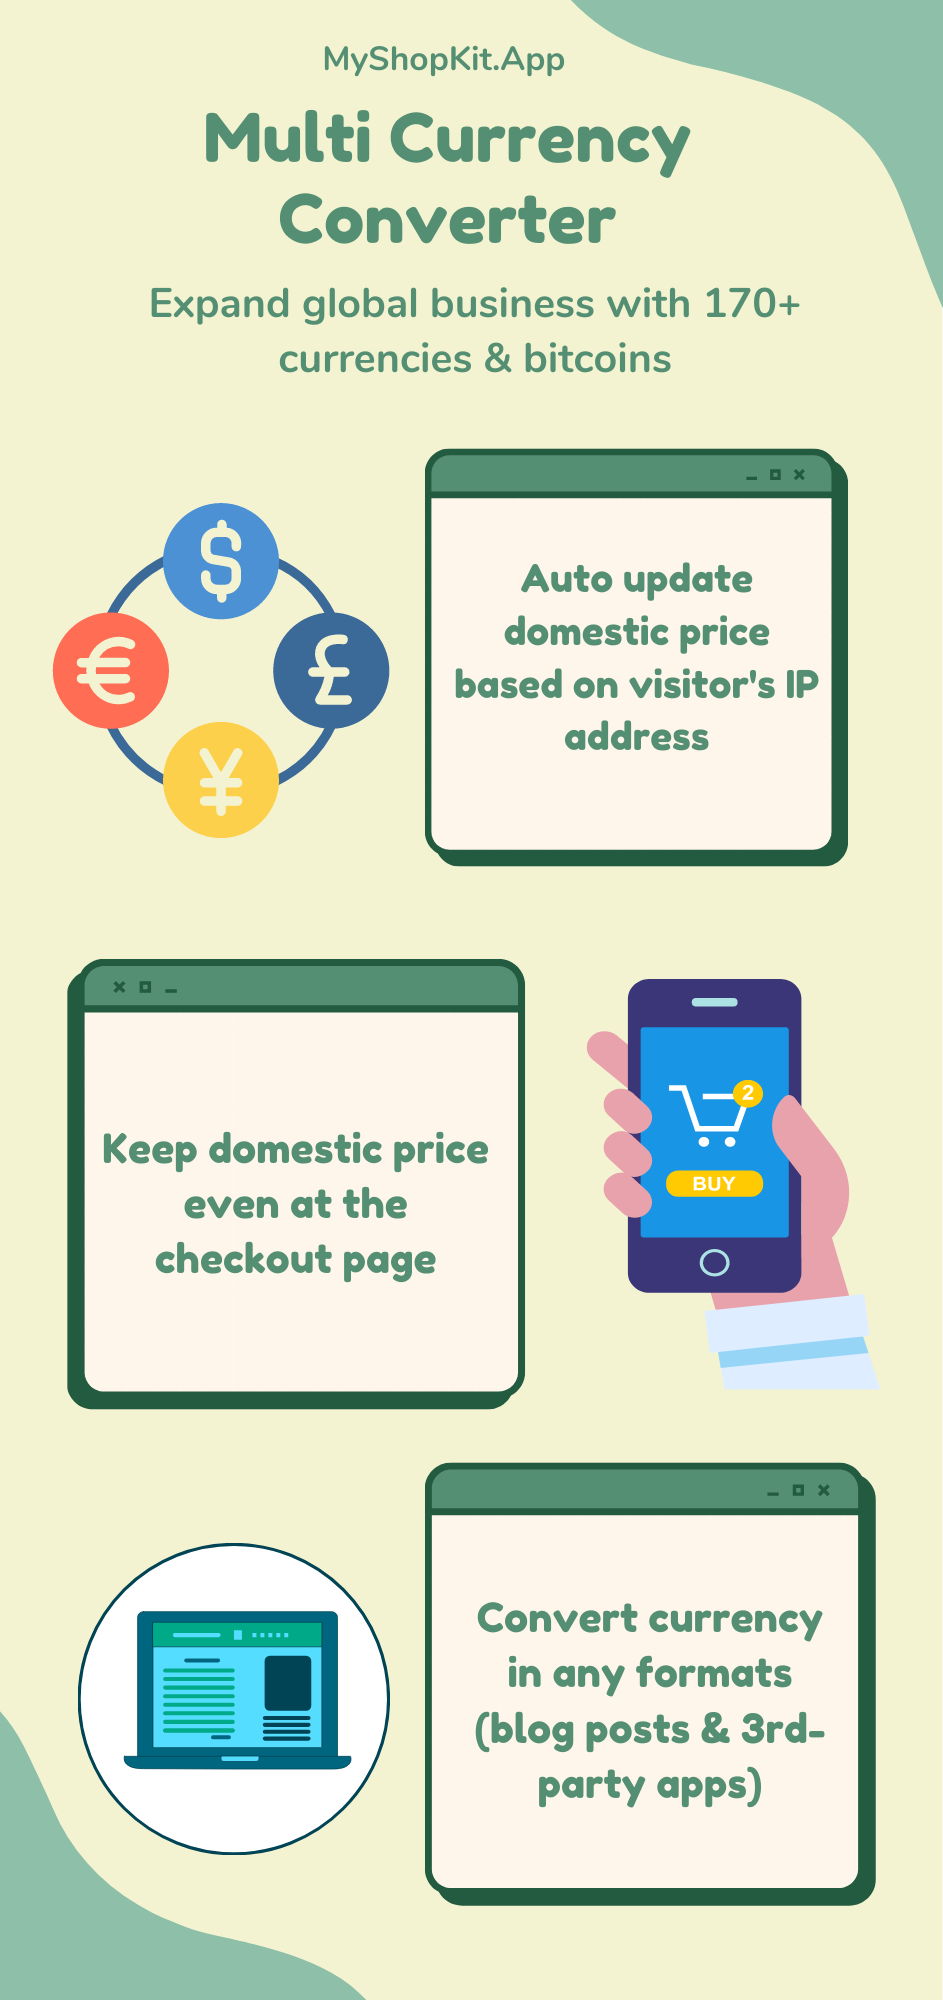 MyShopKit-Multi-Currency-Converter-Infographic